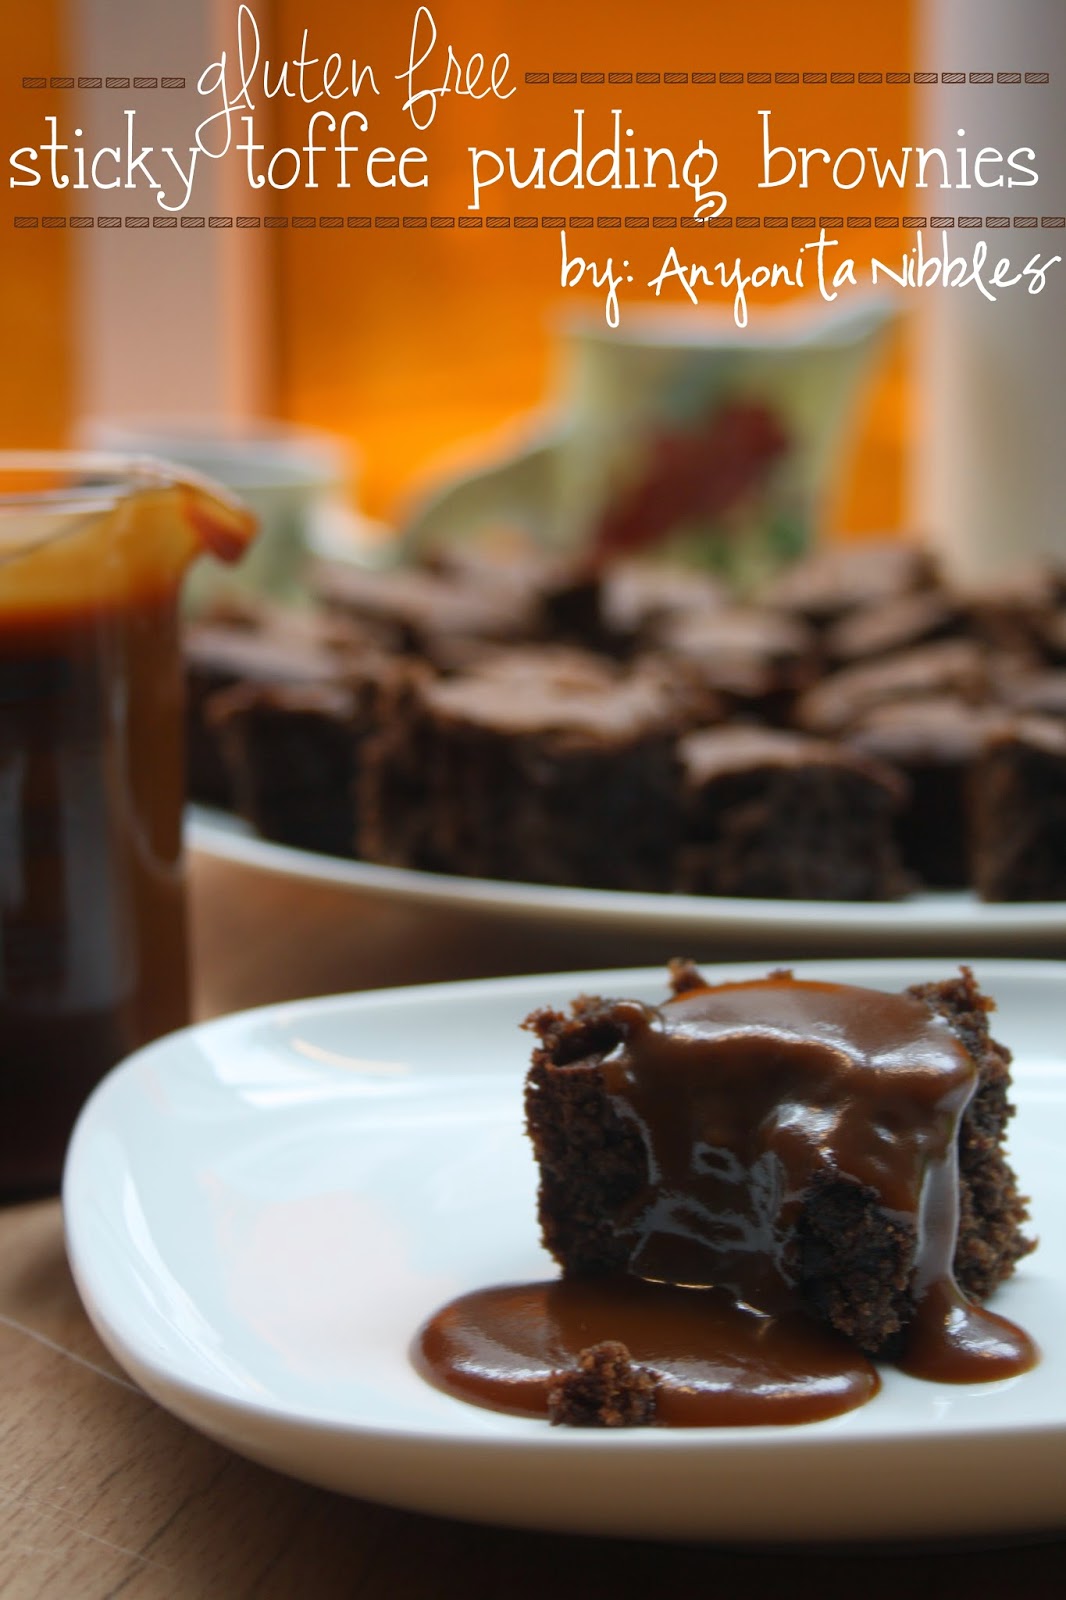 Gluten Free Sticky Toffee Pudding Brownies with Toffee Sauce from Anyonita Nibbles